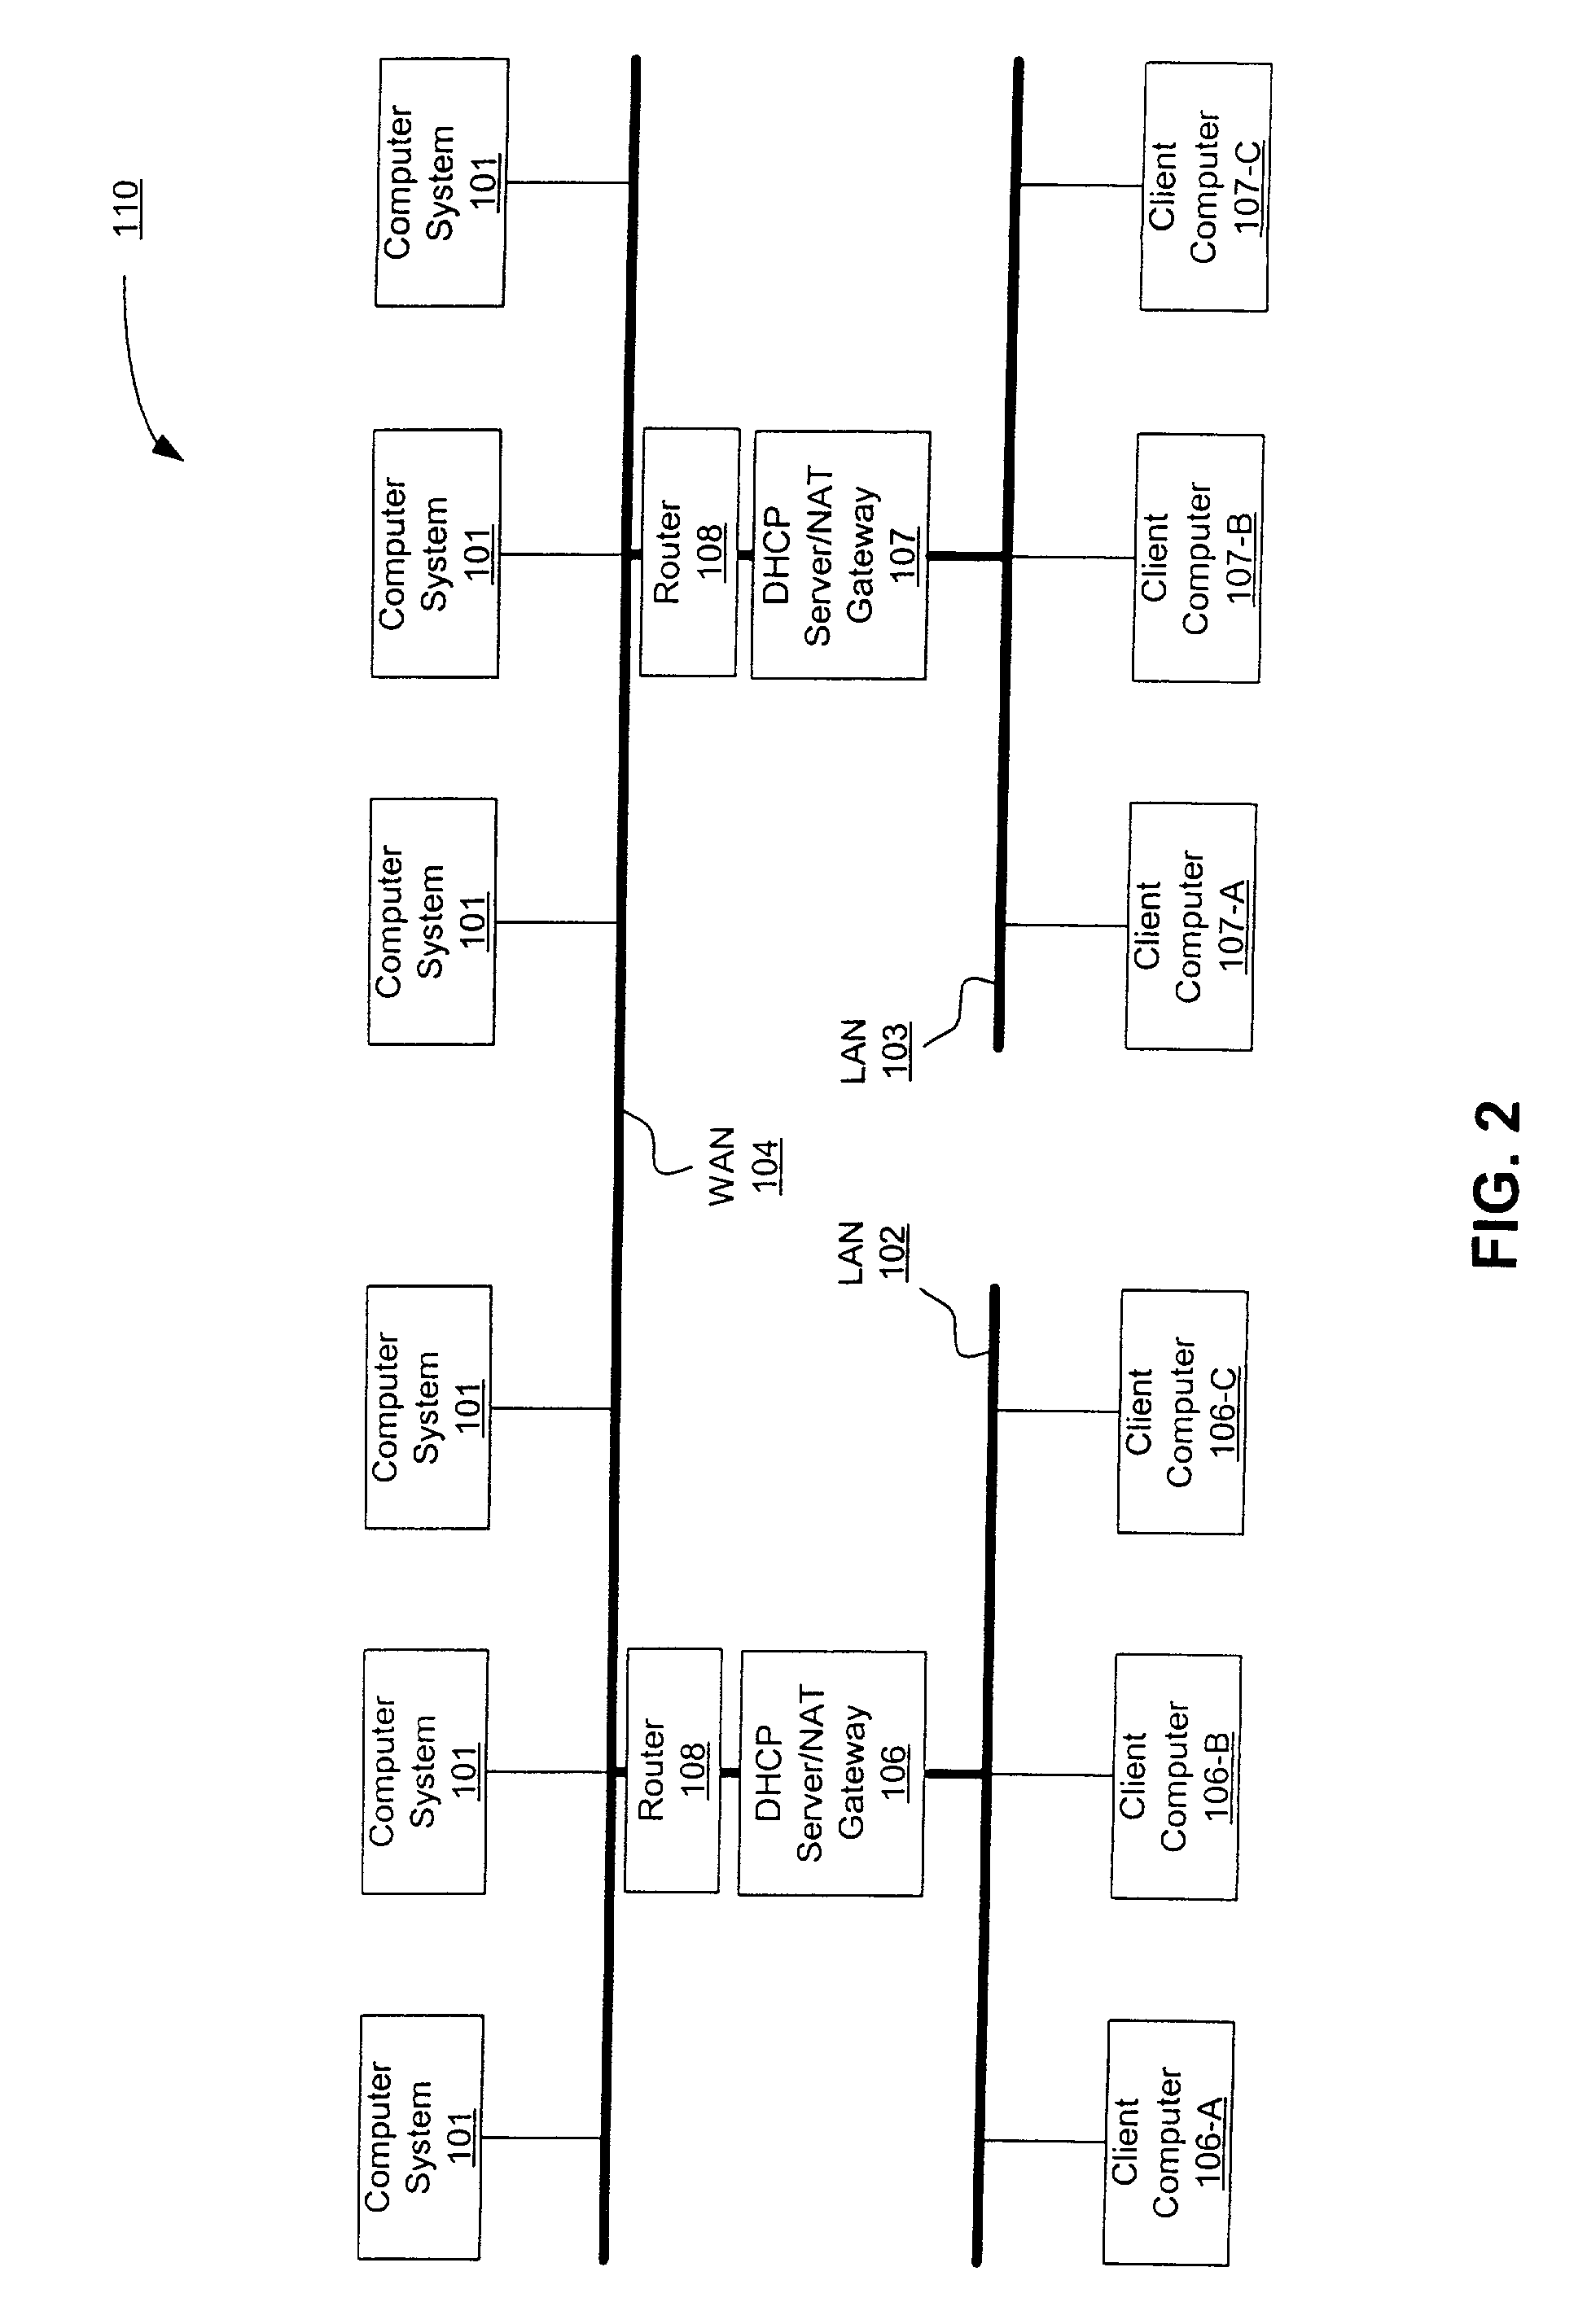 Method and apparatus for network address translation integration with internet protocol security